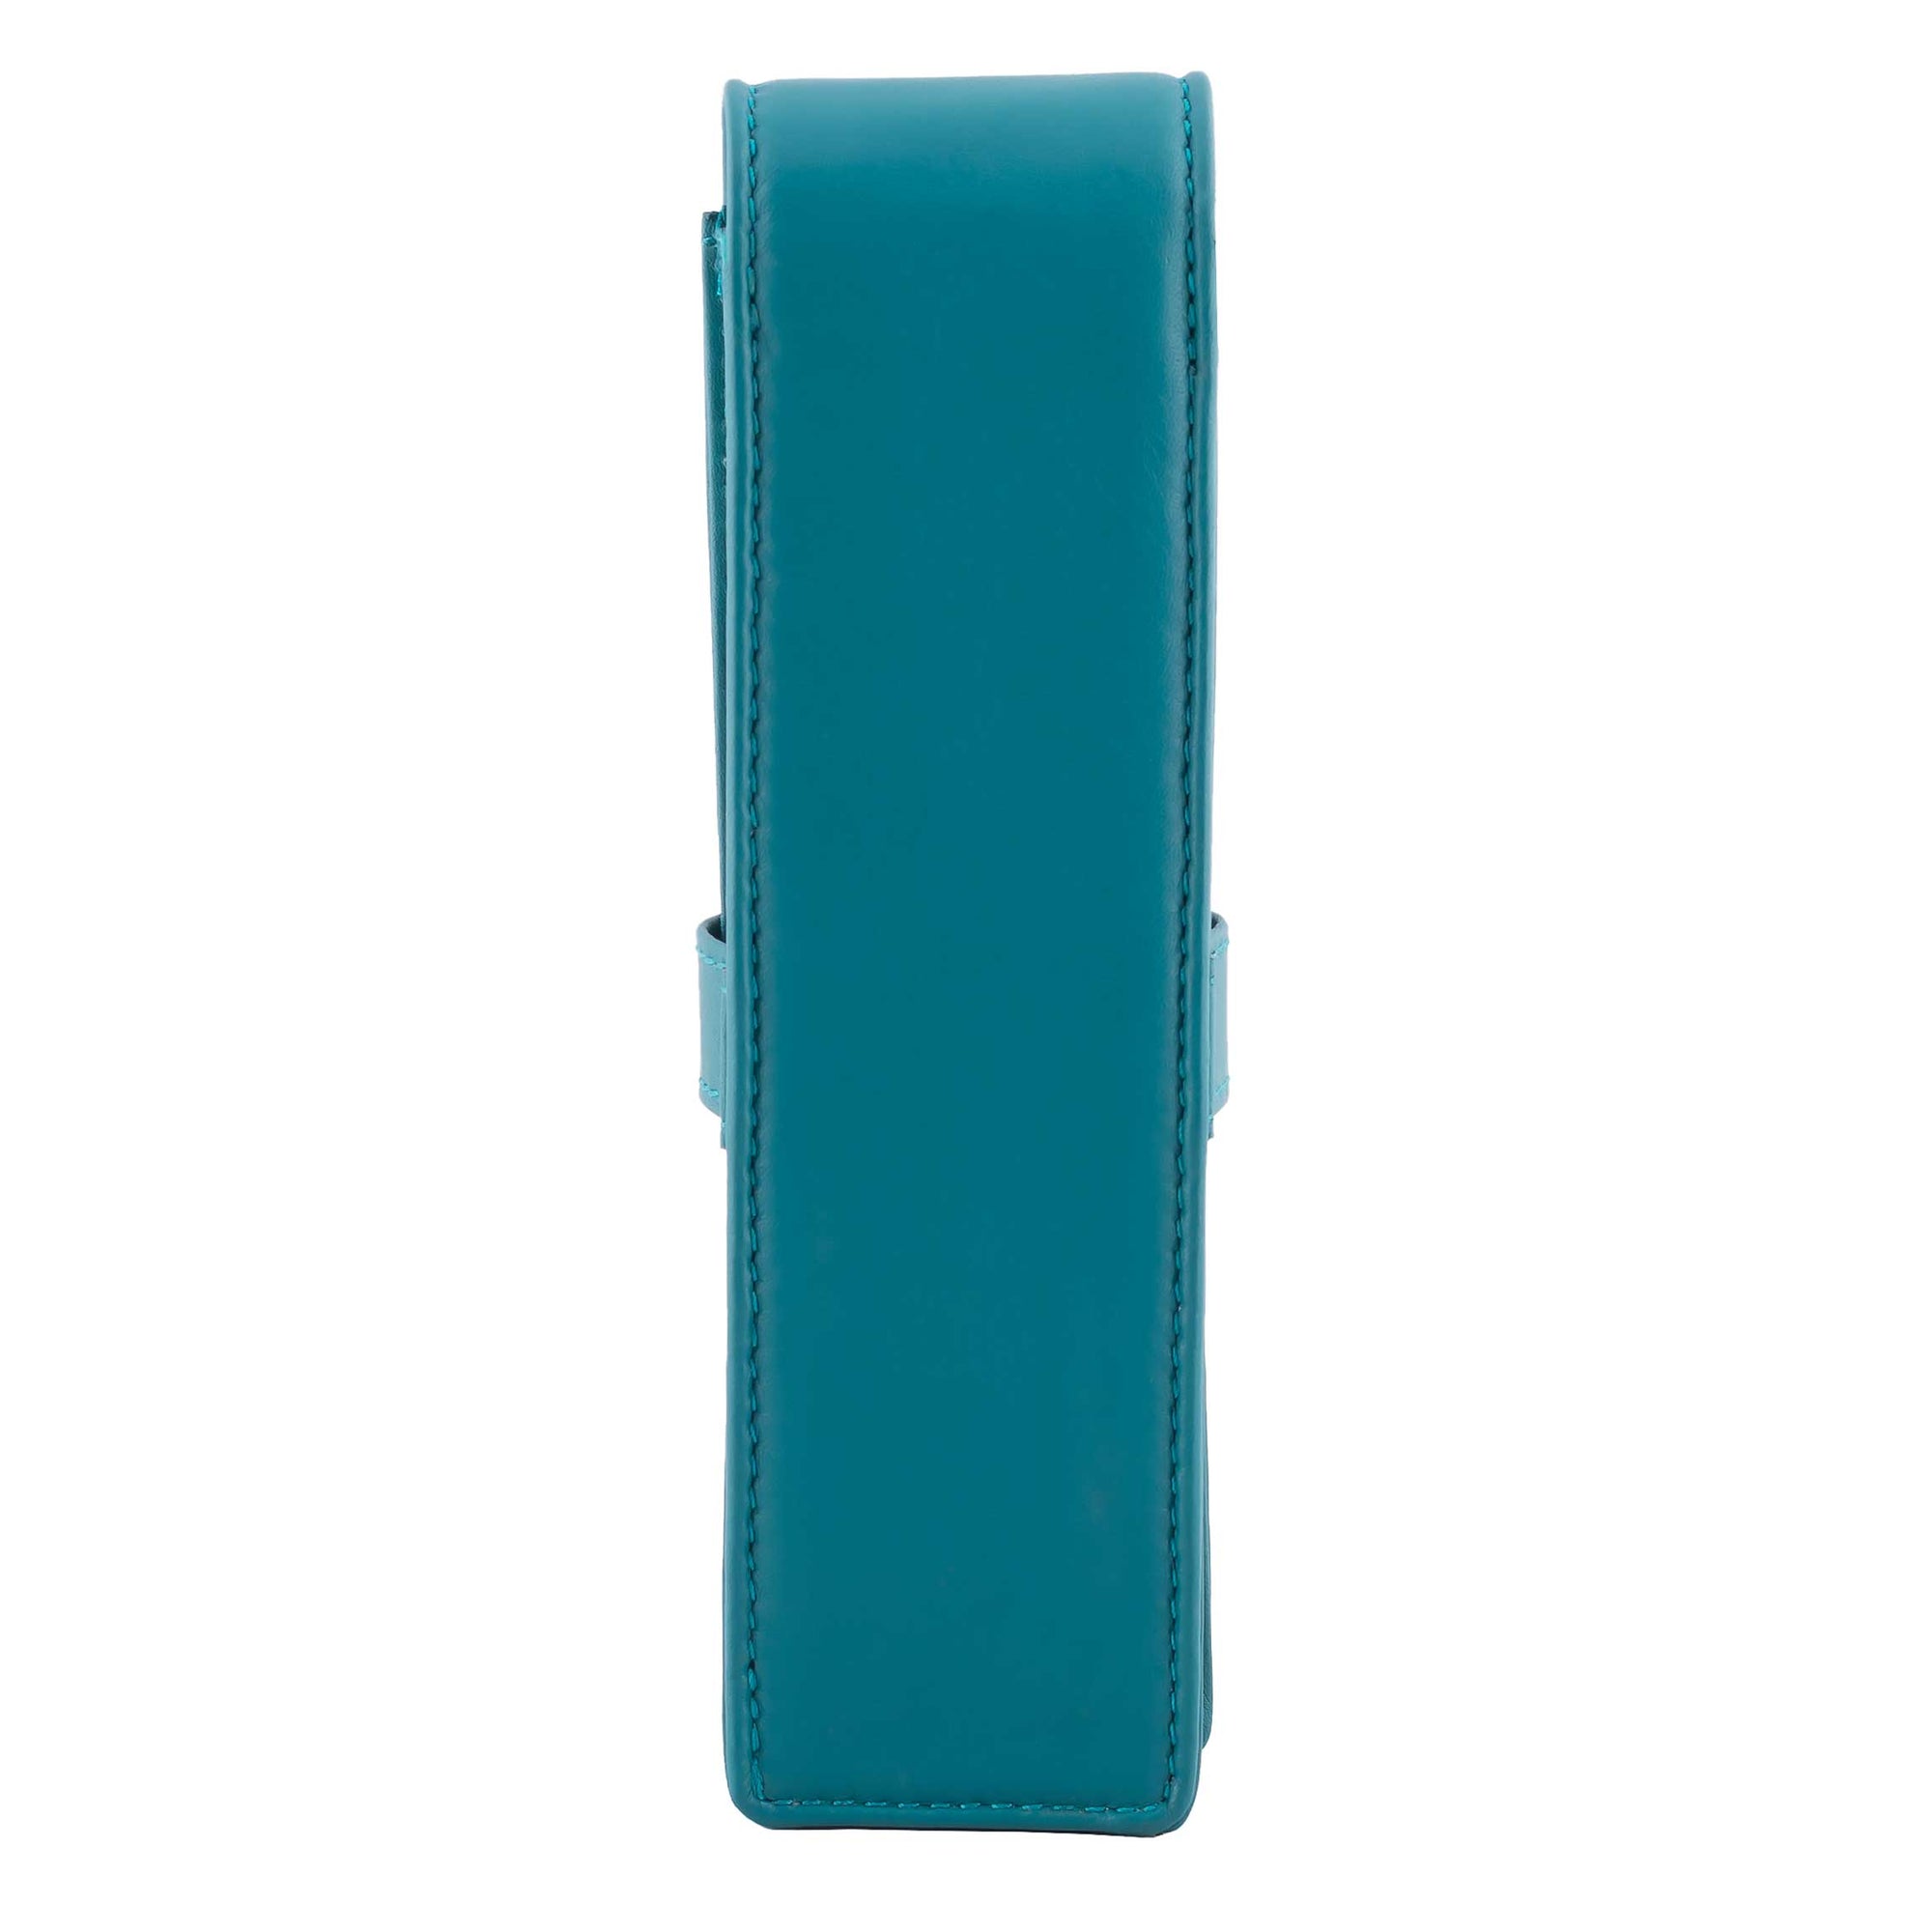 DiLoro Double Pen Case Holder in Top Quality, Full Grain Nappa Leather - Turquoise Green